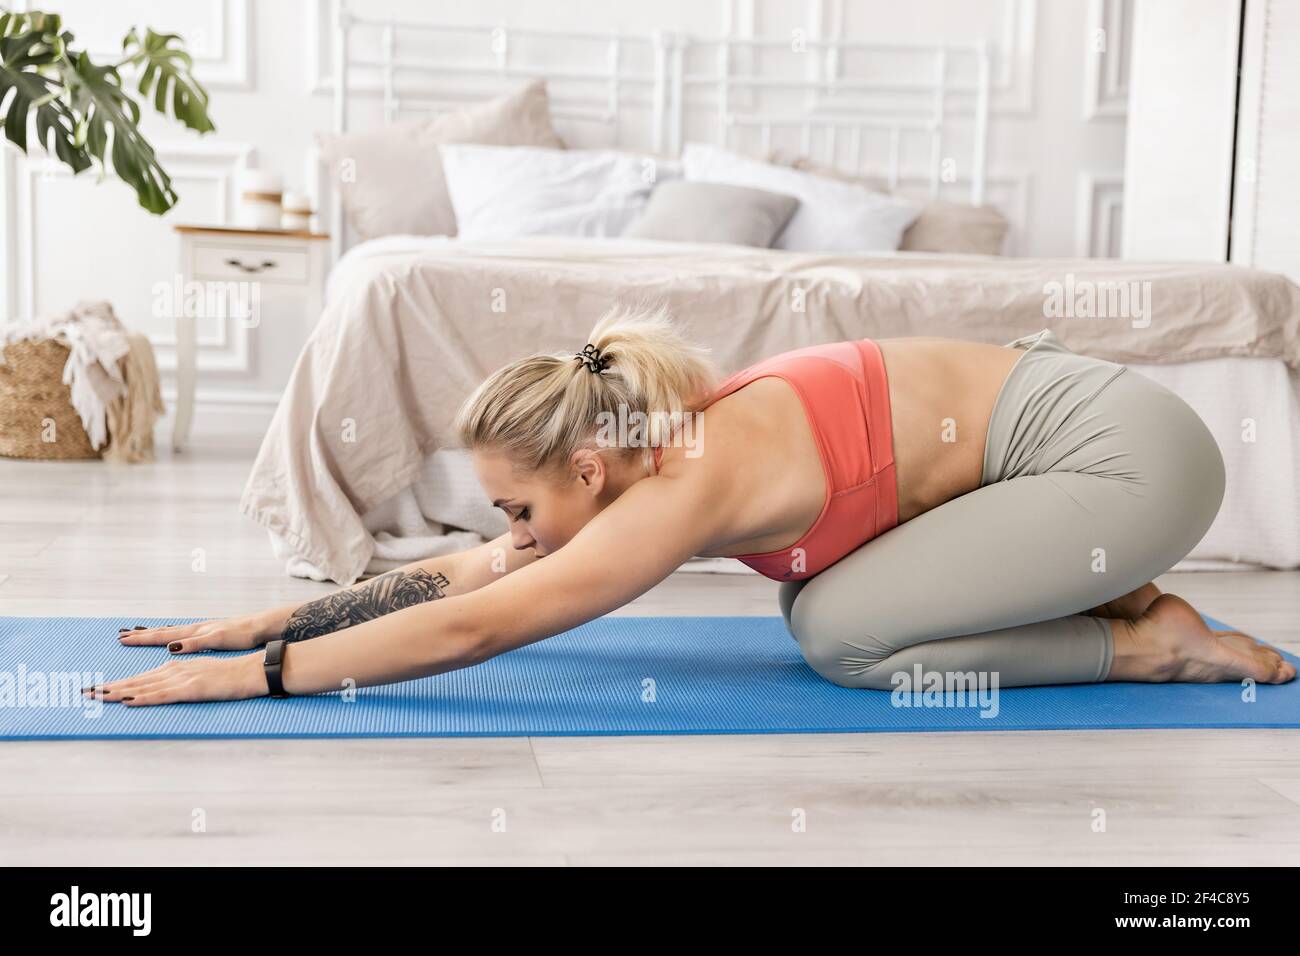 3,000+ Woman Yoga Pants Stock Videos and Royalty-Free Footage - iStock